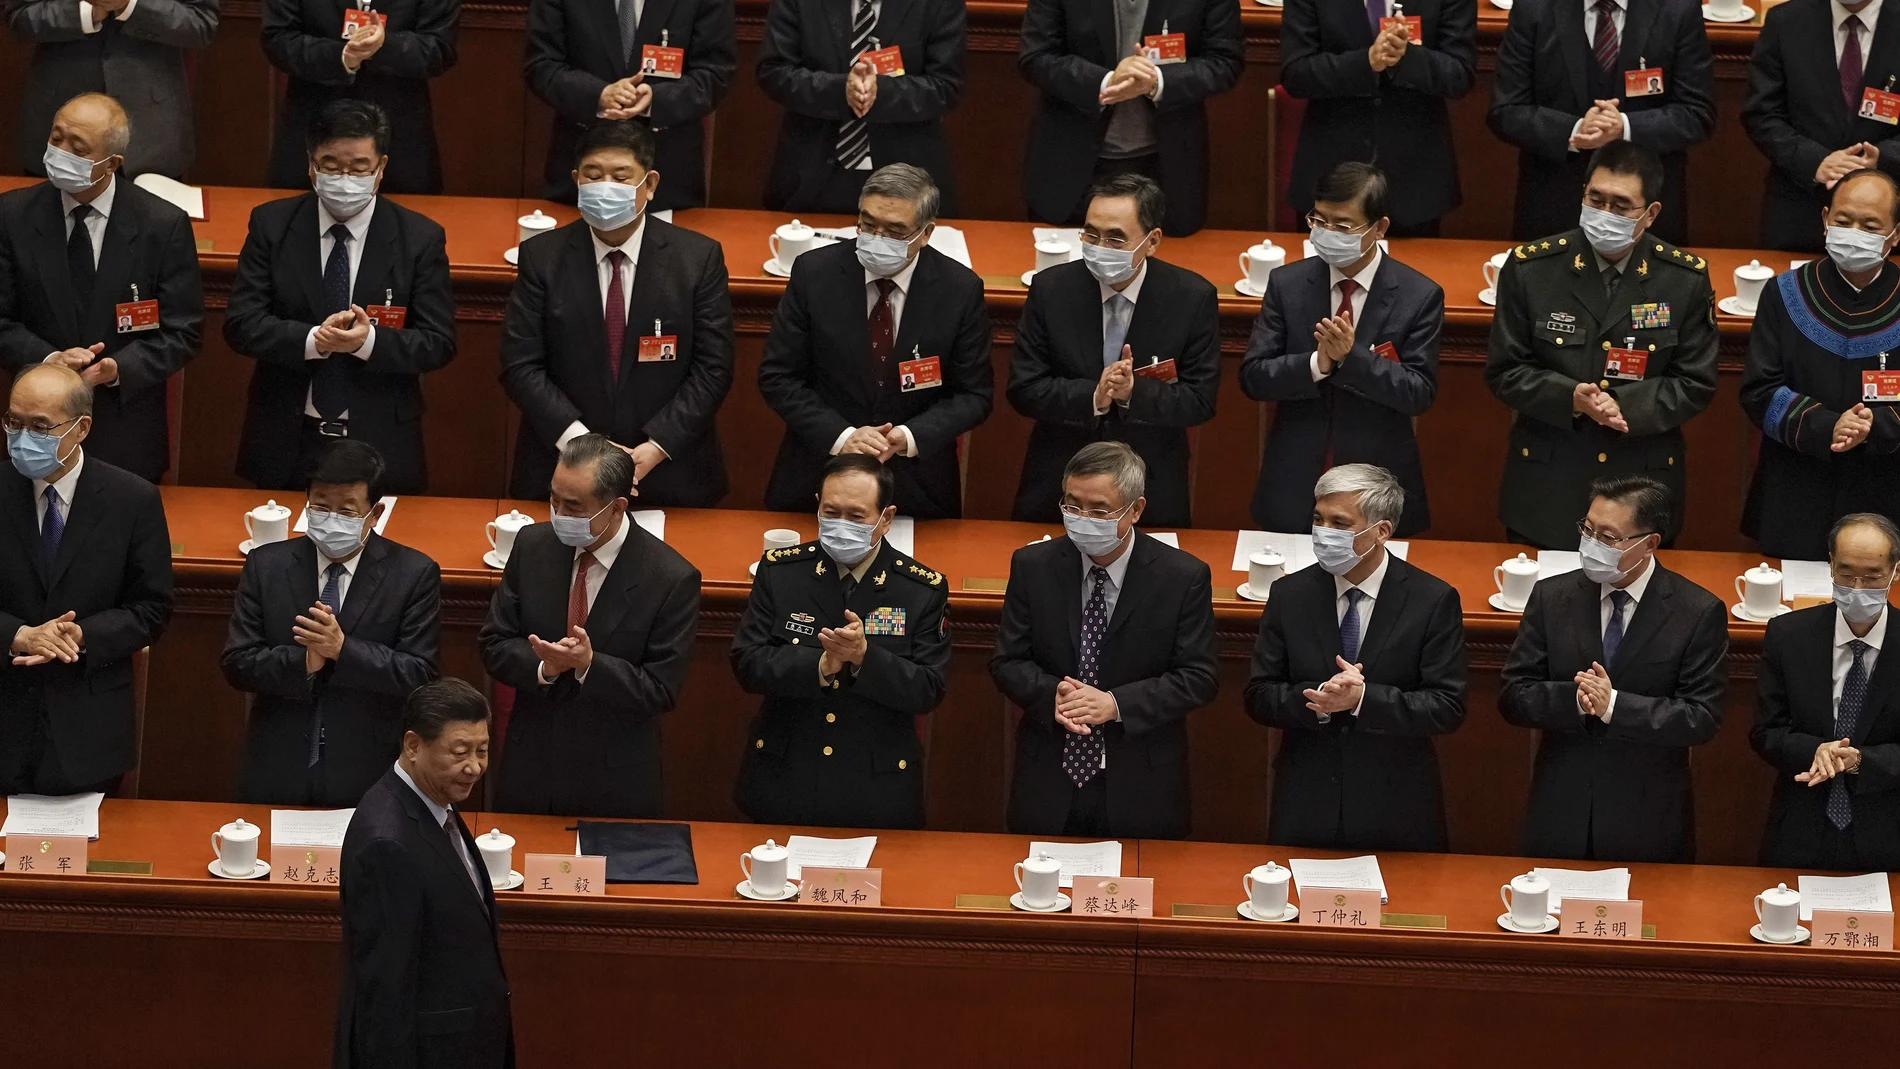 FILE - In this March 4, 2021, file photo, delegates wearing face masks to help curb the spread of the coronavirus applaud as Chinese President Xi Jinping arrives for the opening session of Chinese People's Political Consultative Conference (CPPCC) at the Great Hall of the People in Beijing. The catchword â€œrejuvenationâ€ has been tucked into the major speeches at China's biggest political event of the year, the meeting of its 3,000-member legislature. (AP Photo/Andy Wong, File)